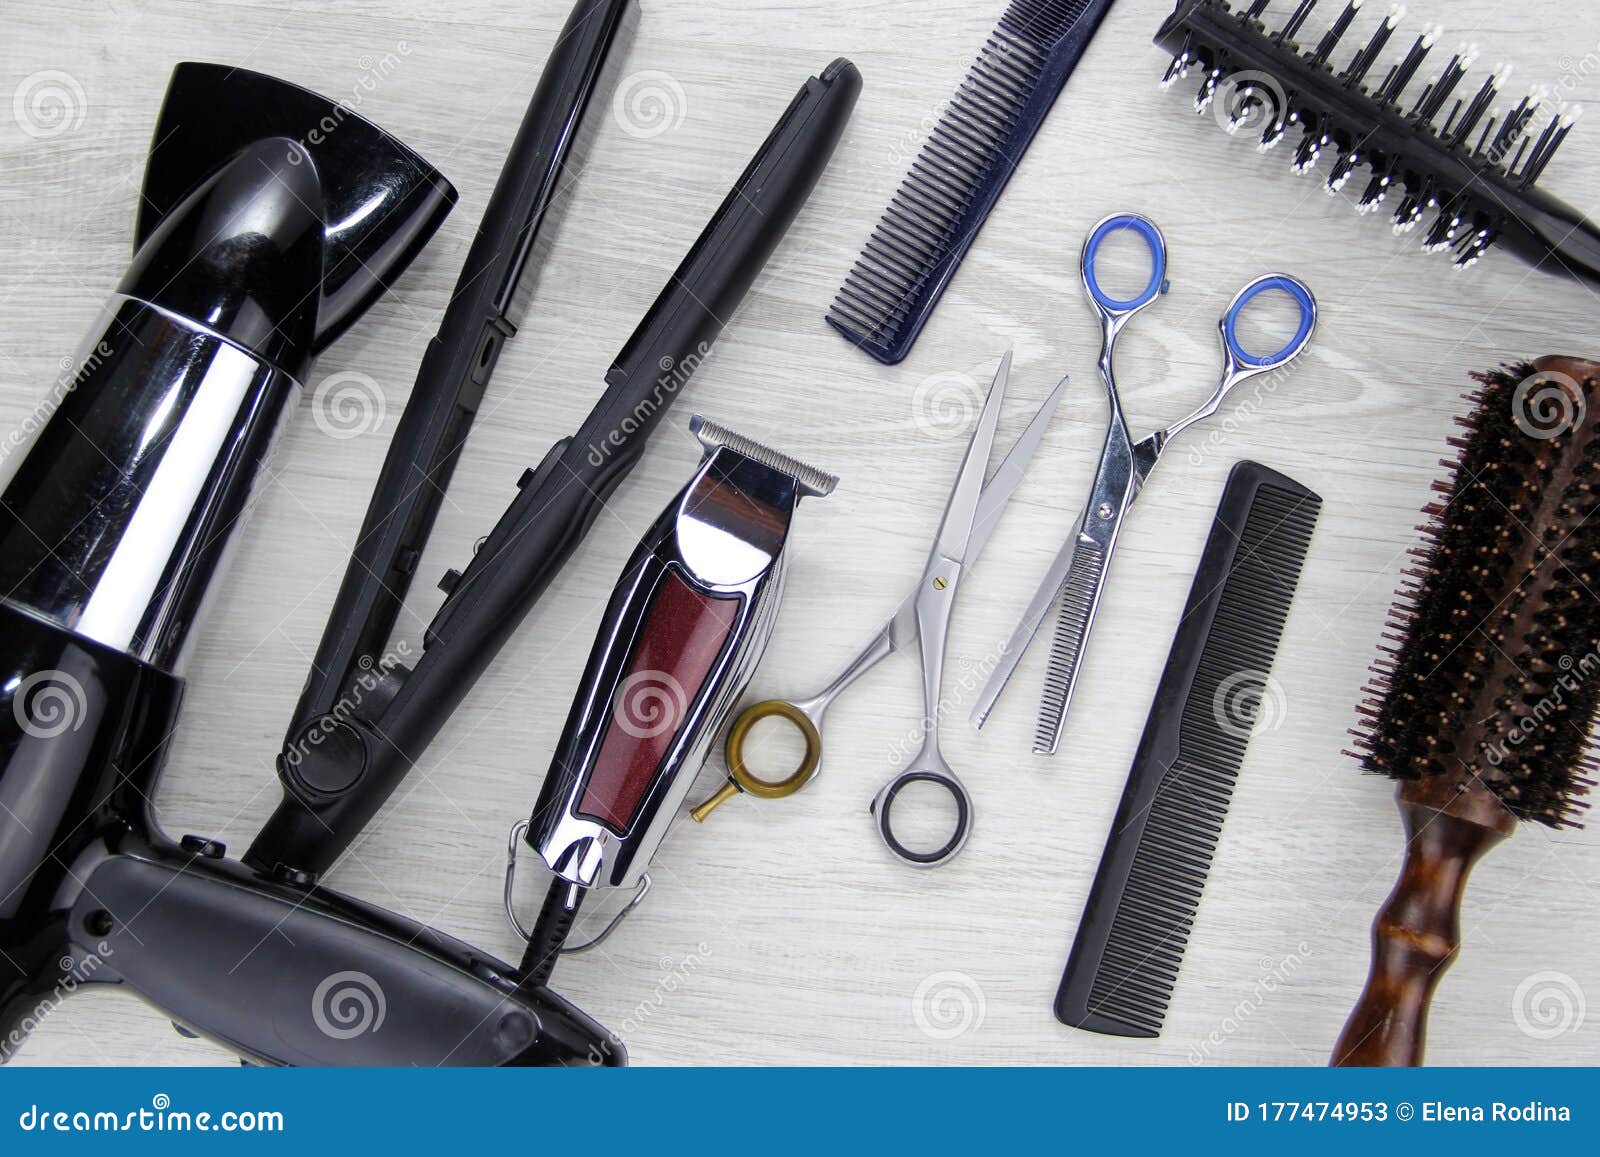 Background of Hair Cutting Tools. Full Frame of Professional Hair Styling  Tools on a Wooden Background Stock Image - Image of barbershop, isolated:  177474953